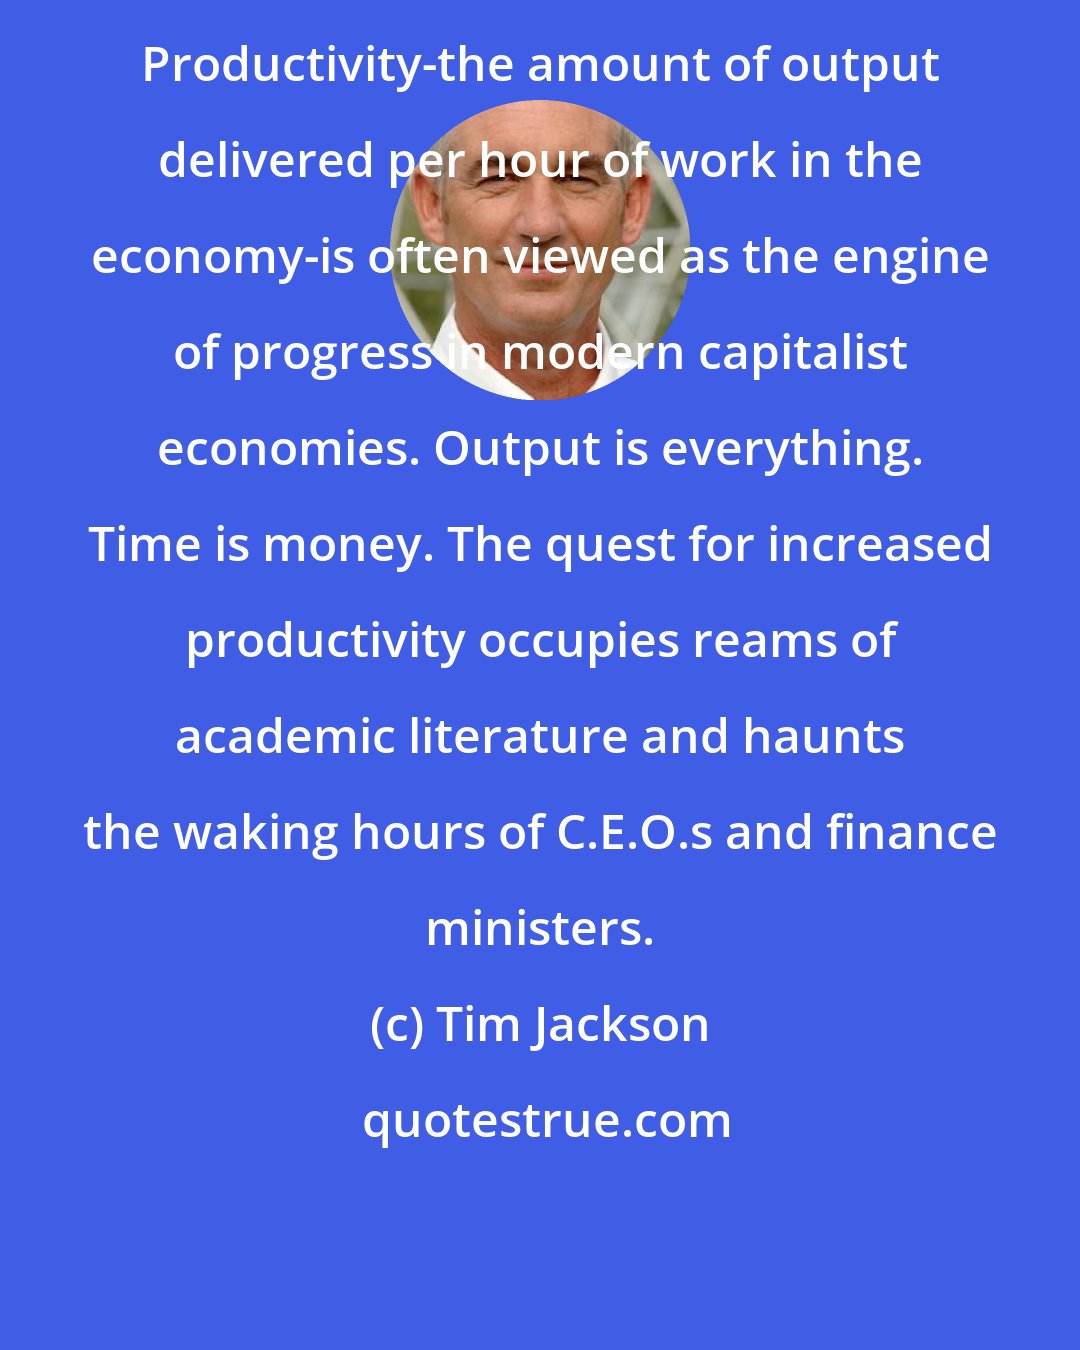 Tim Jackson: Productivity-the amount of output delivered per hour of work in the economy-is often viewed as the engine of progress in modern capitalist economies. Output is everything. Time is money. The quest for increased productivity occupies reams of academic literature and haunts the waking hours of C.E.O.s and finance ministers.